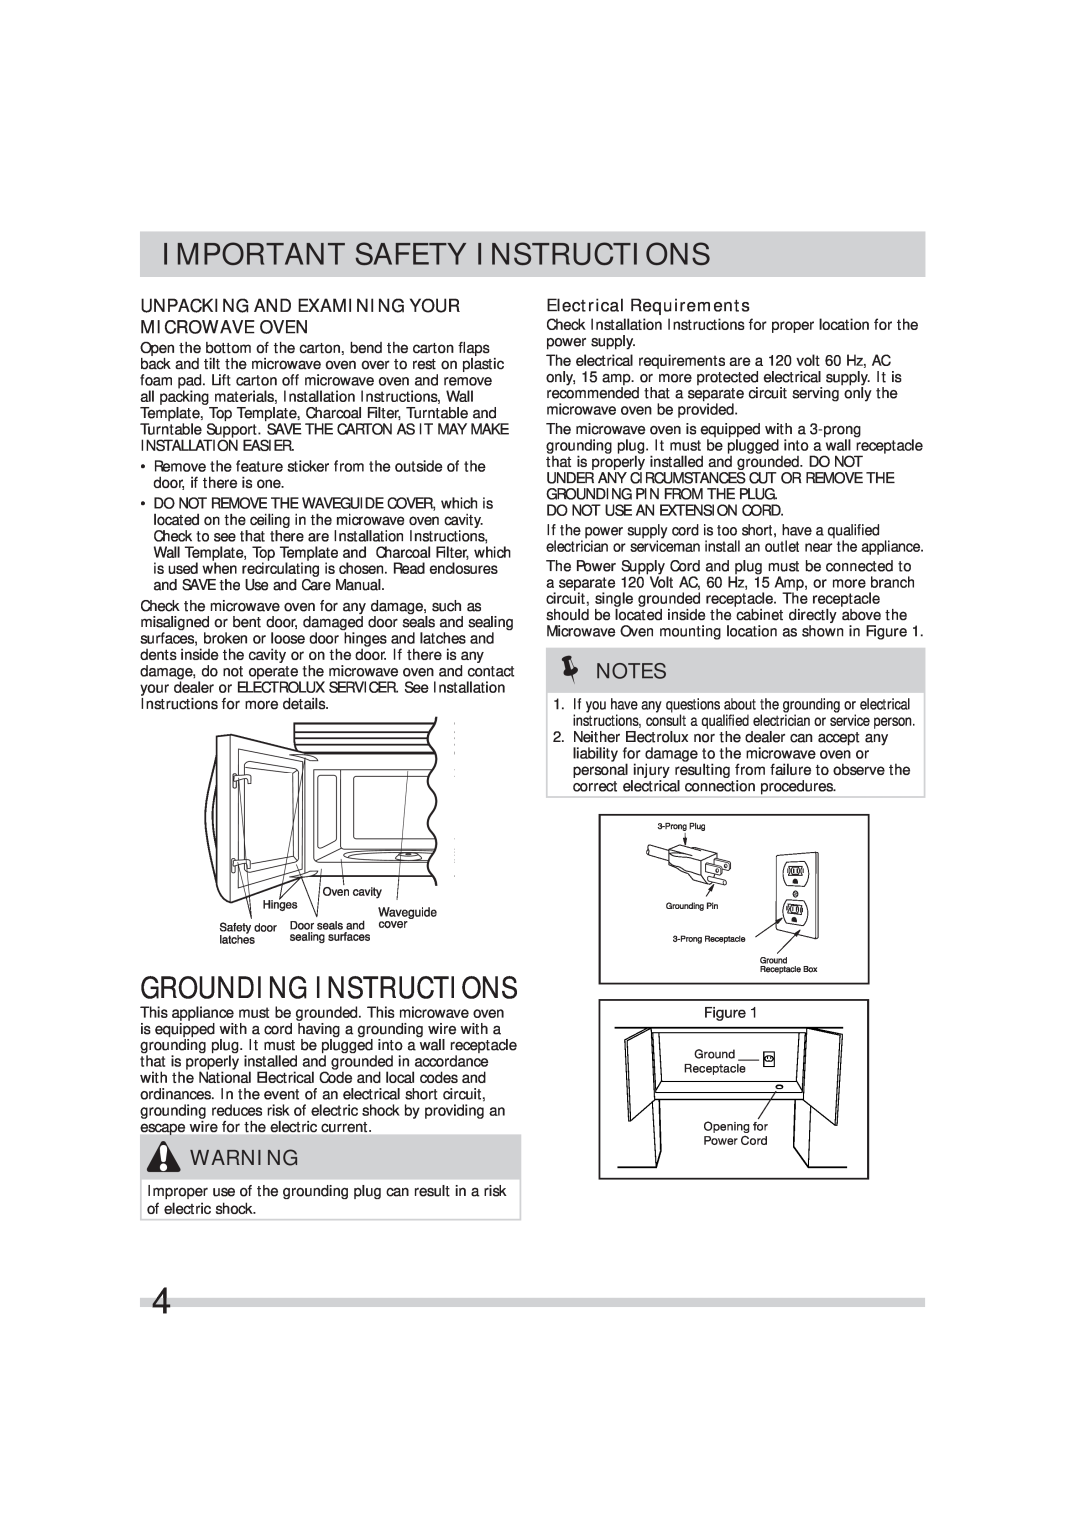 Frigidaire 316495054 Unpacking And Examining Your Microwave Oven, Electrical Requirements, Important Safety Instructions 